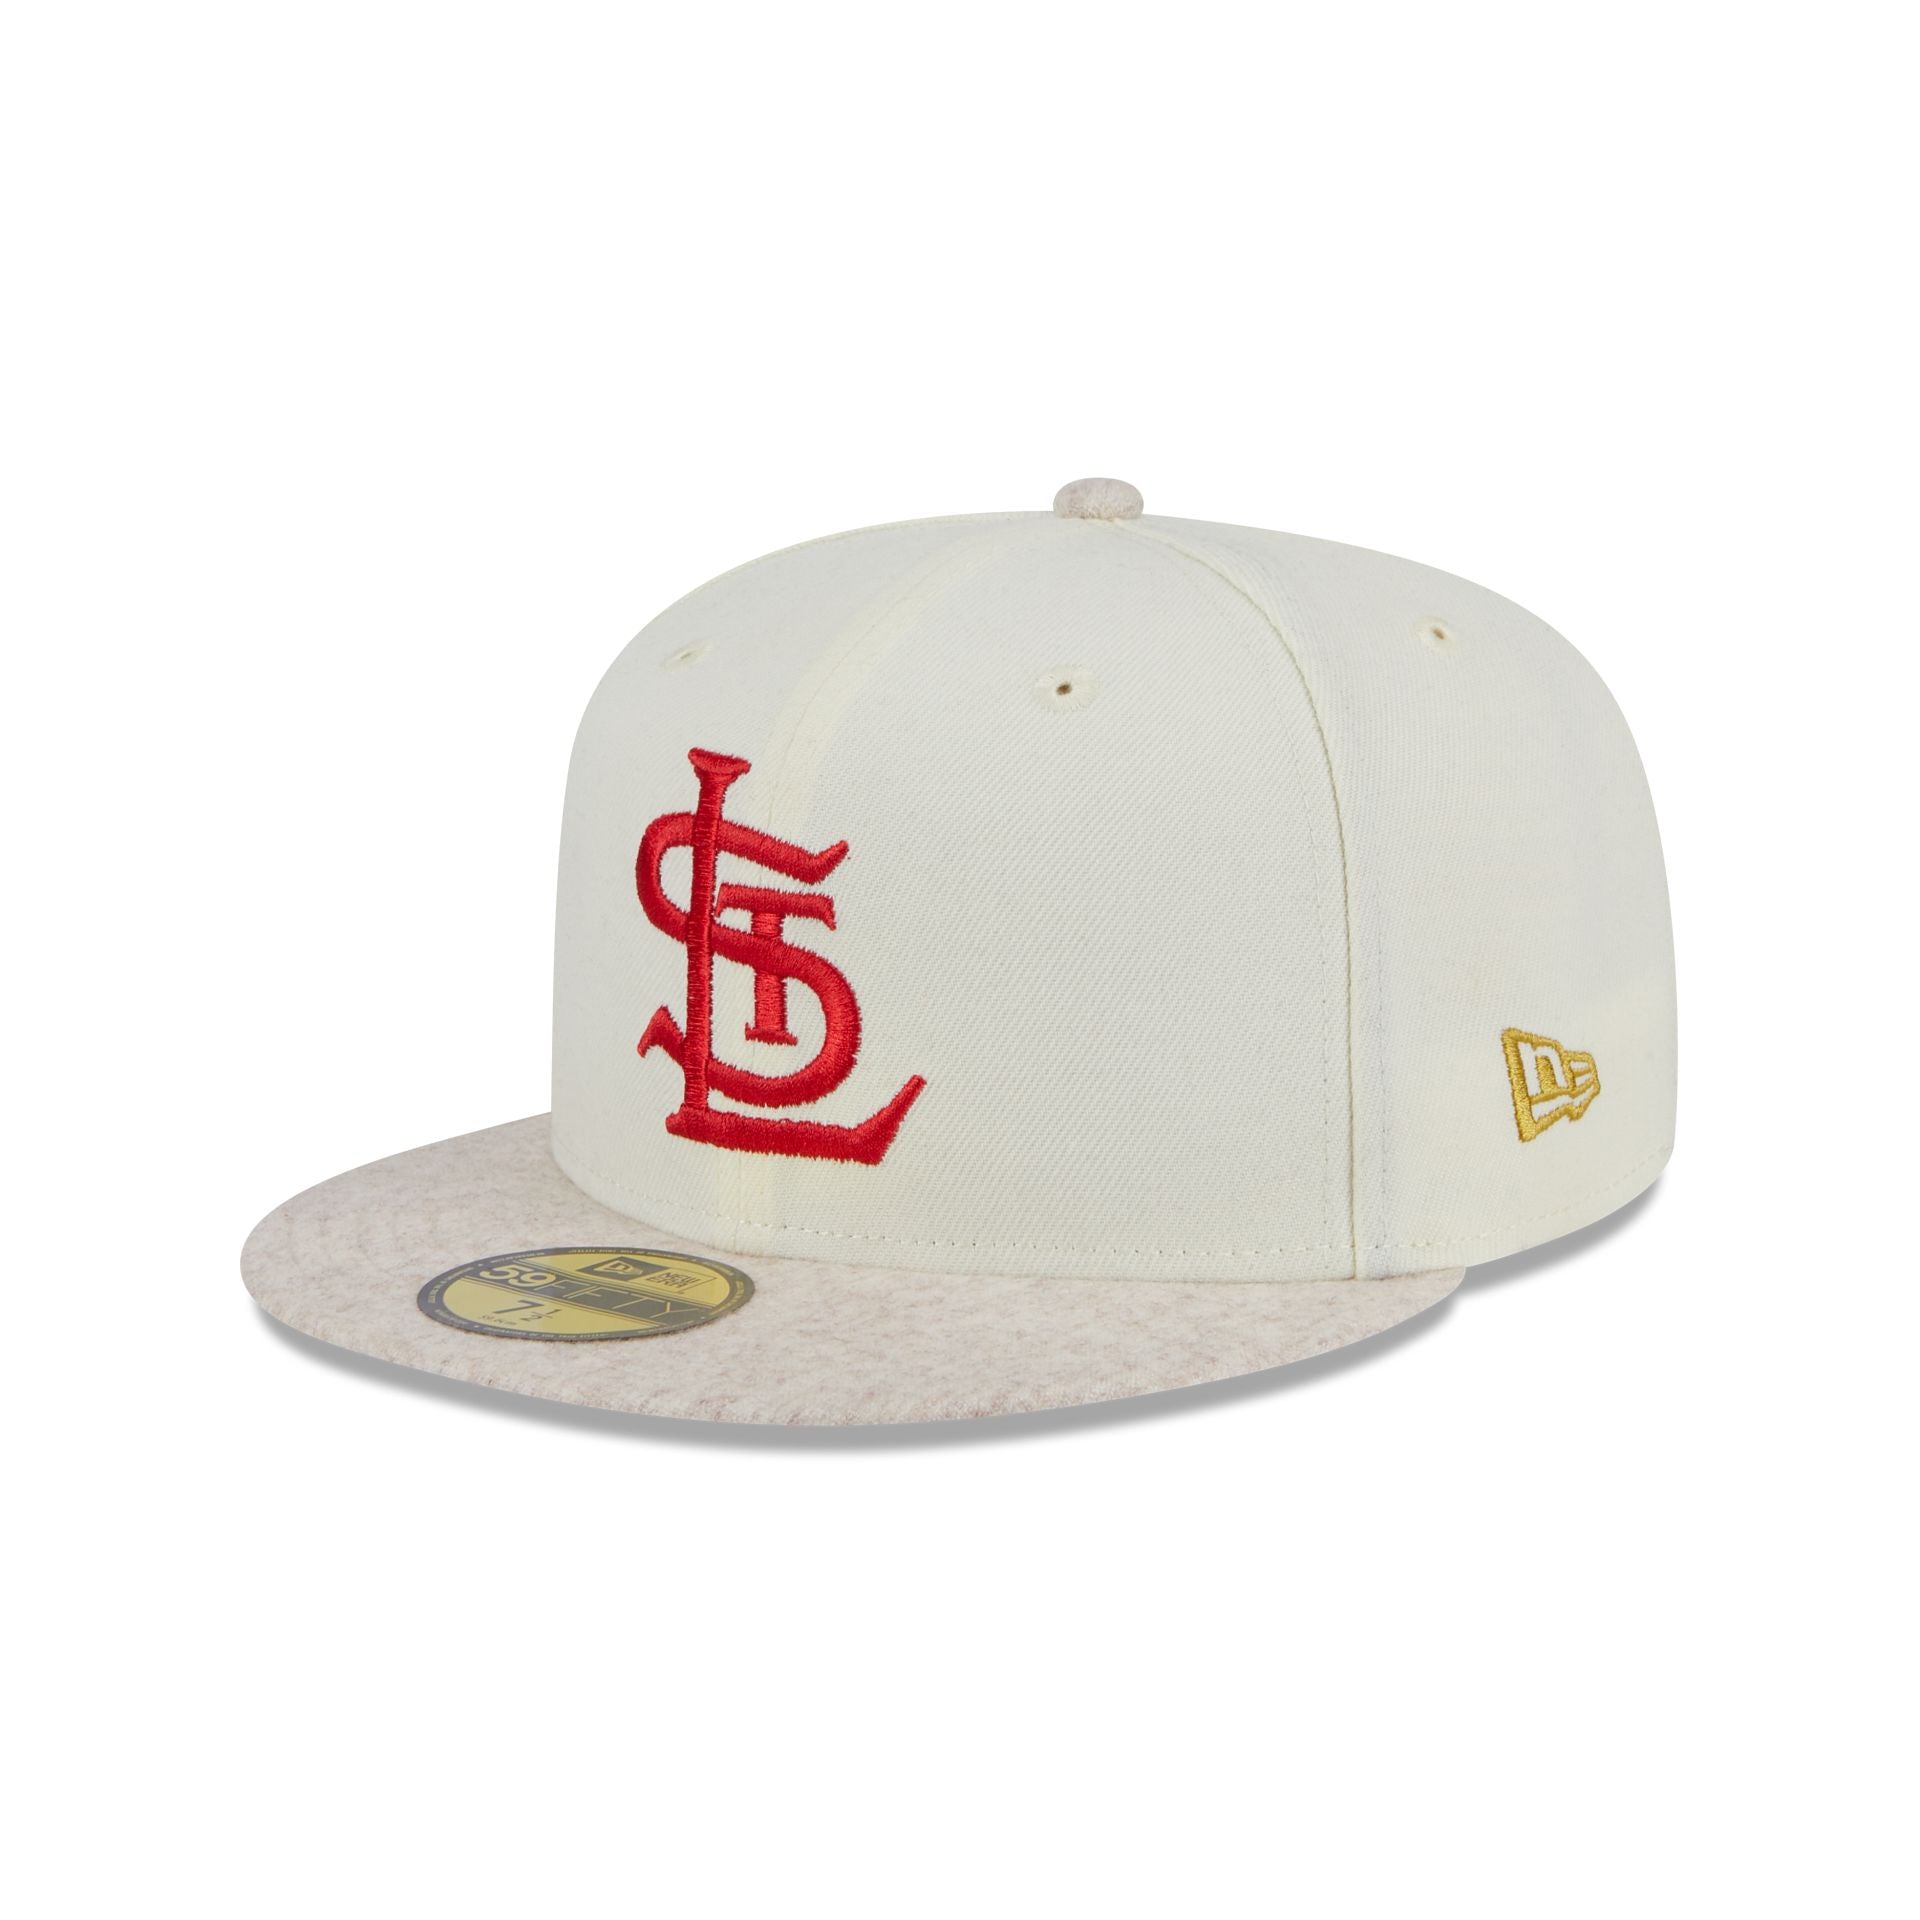 St Louis Cardinals Campus Backpack-Gray